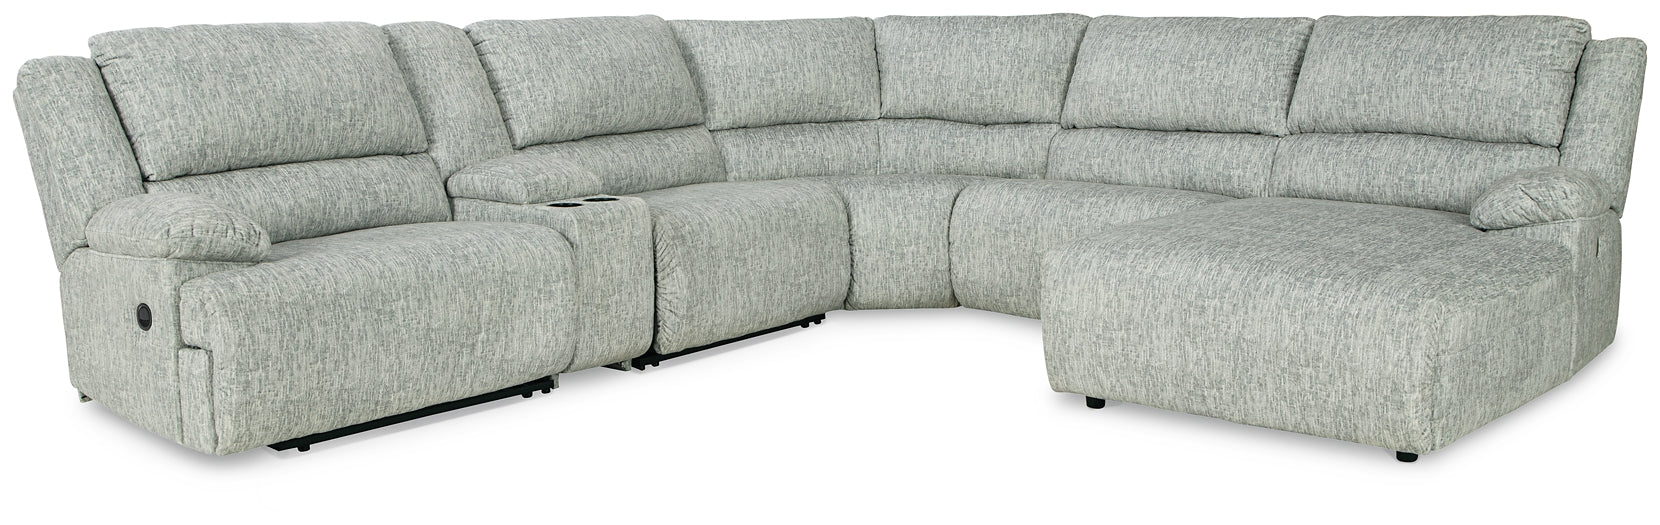 McClelland 6-Piece Reclining Sectional with Chaise JB's Furniture  Home Furniture, Home Decor, Furniture Store